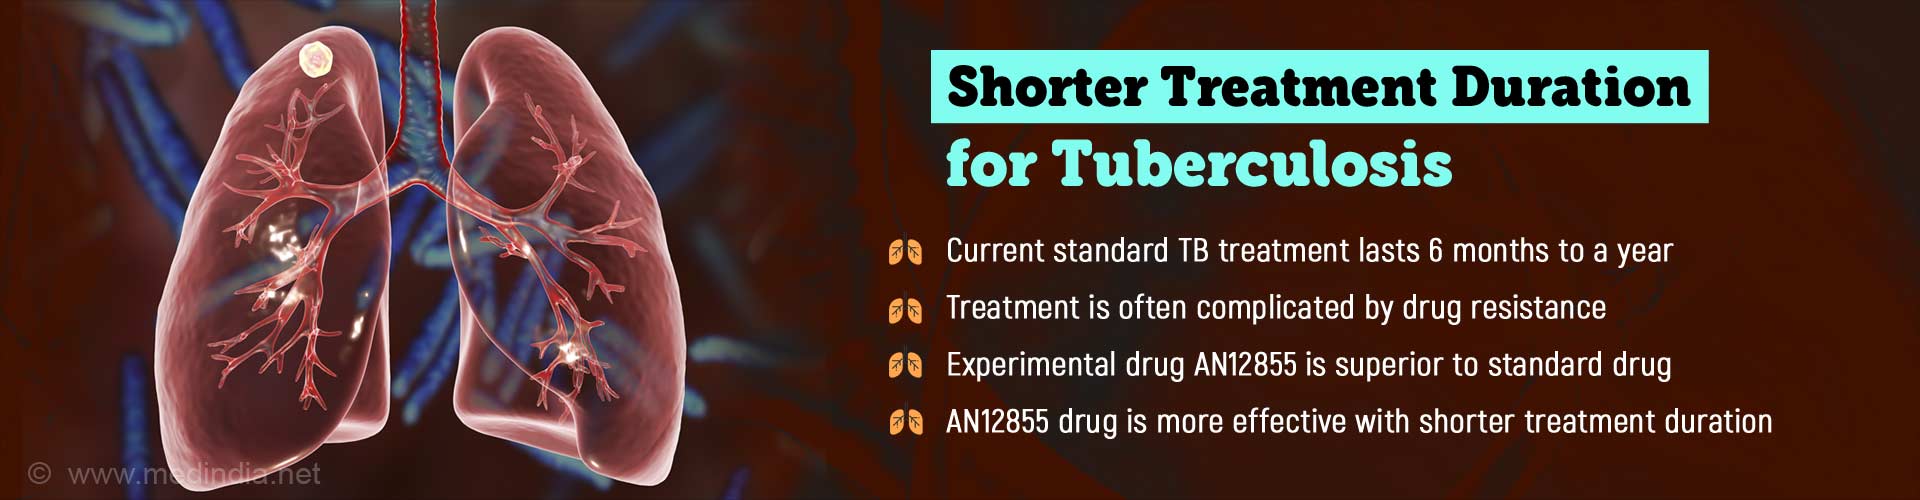 Shorter treatment duration for tuberculosis. Current standard TB treatment lasts 6 months to a year. Treatment is often complicated by drug resistance. Experimental drug AN12855 is superior to standard drug. AN12855 drug is more effective with shorter treatment duration.